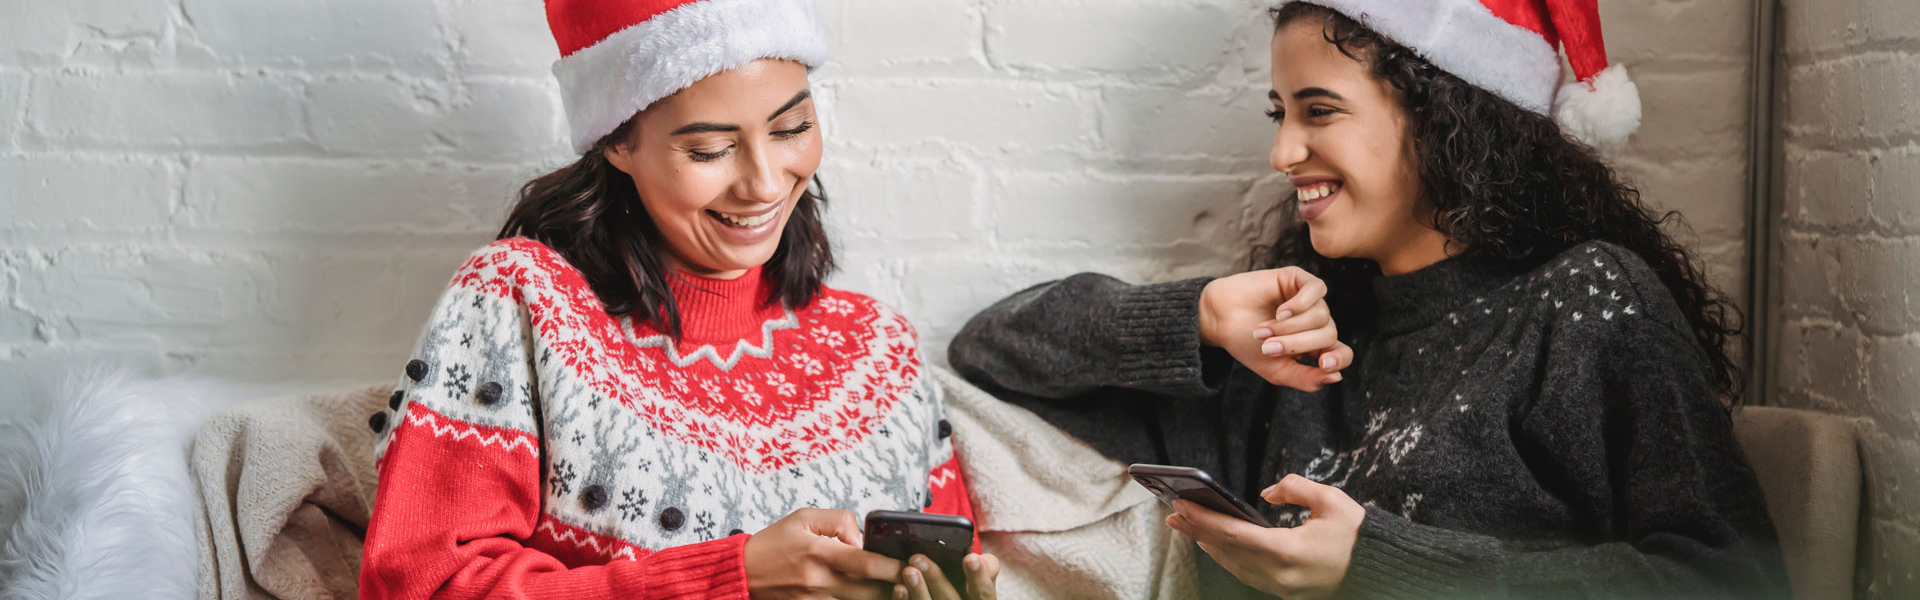 Creating a Digital Advent Calendar: Content and Strategies for Marketing Your Business This Festive Season